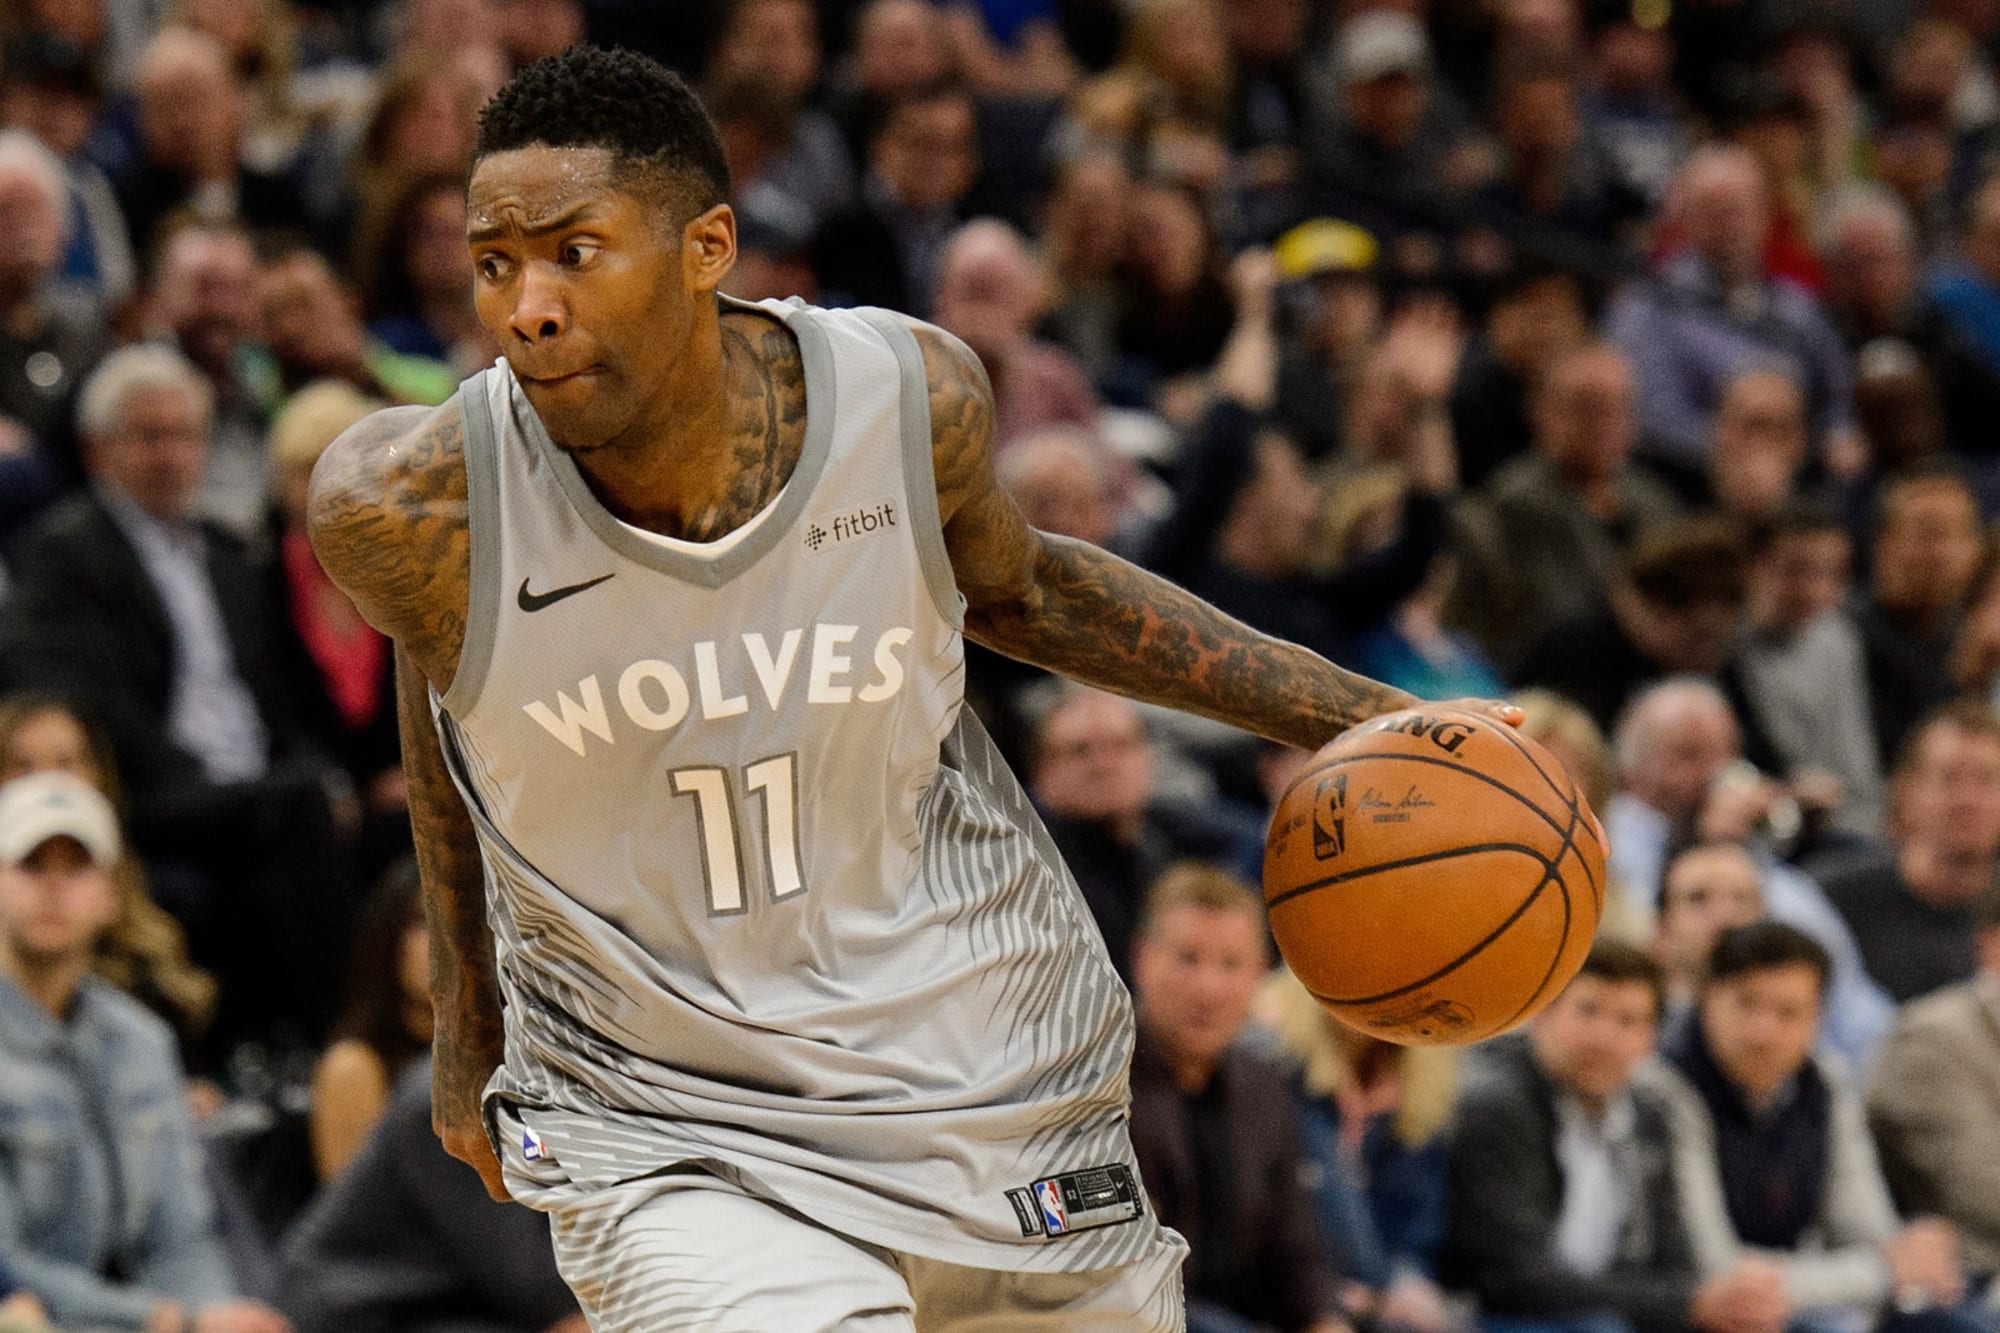 Jamal Crawford signs 2-year deal with Timberwolves over Cavs